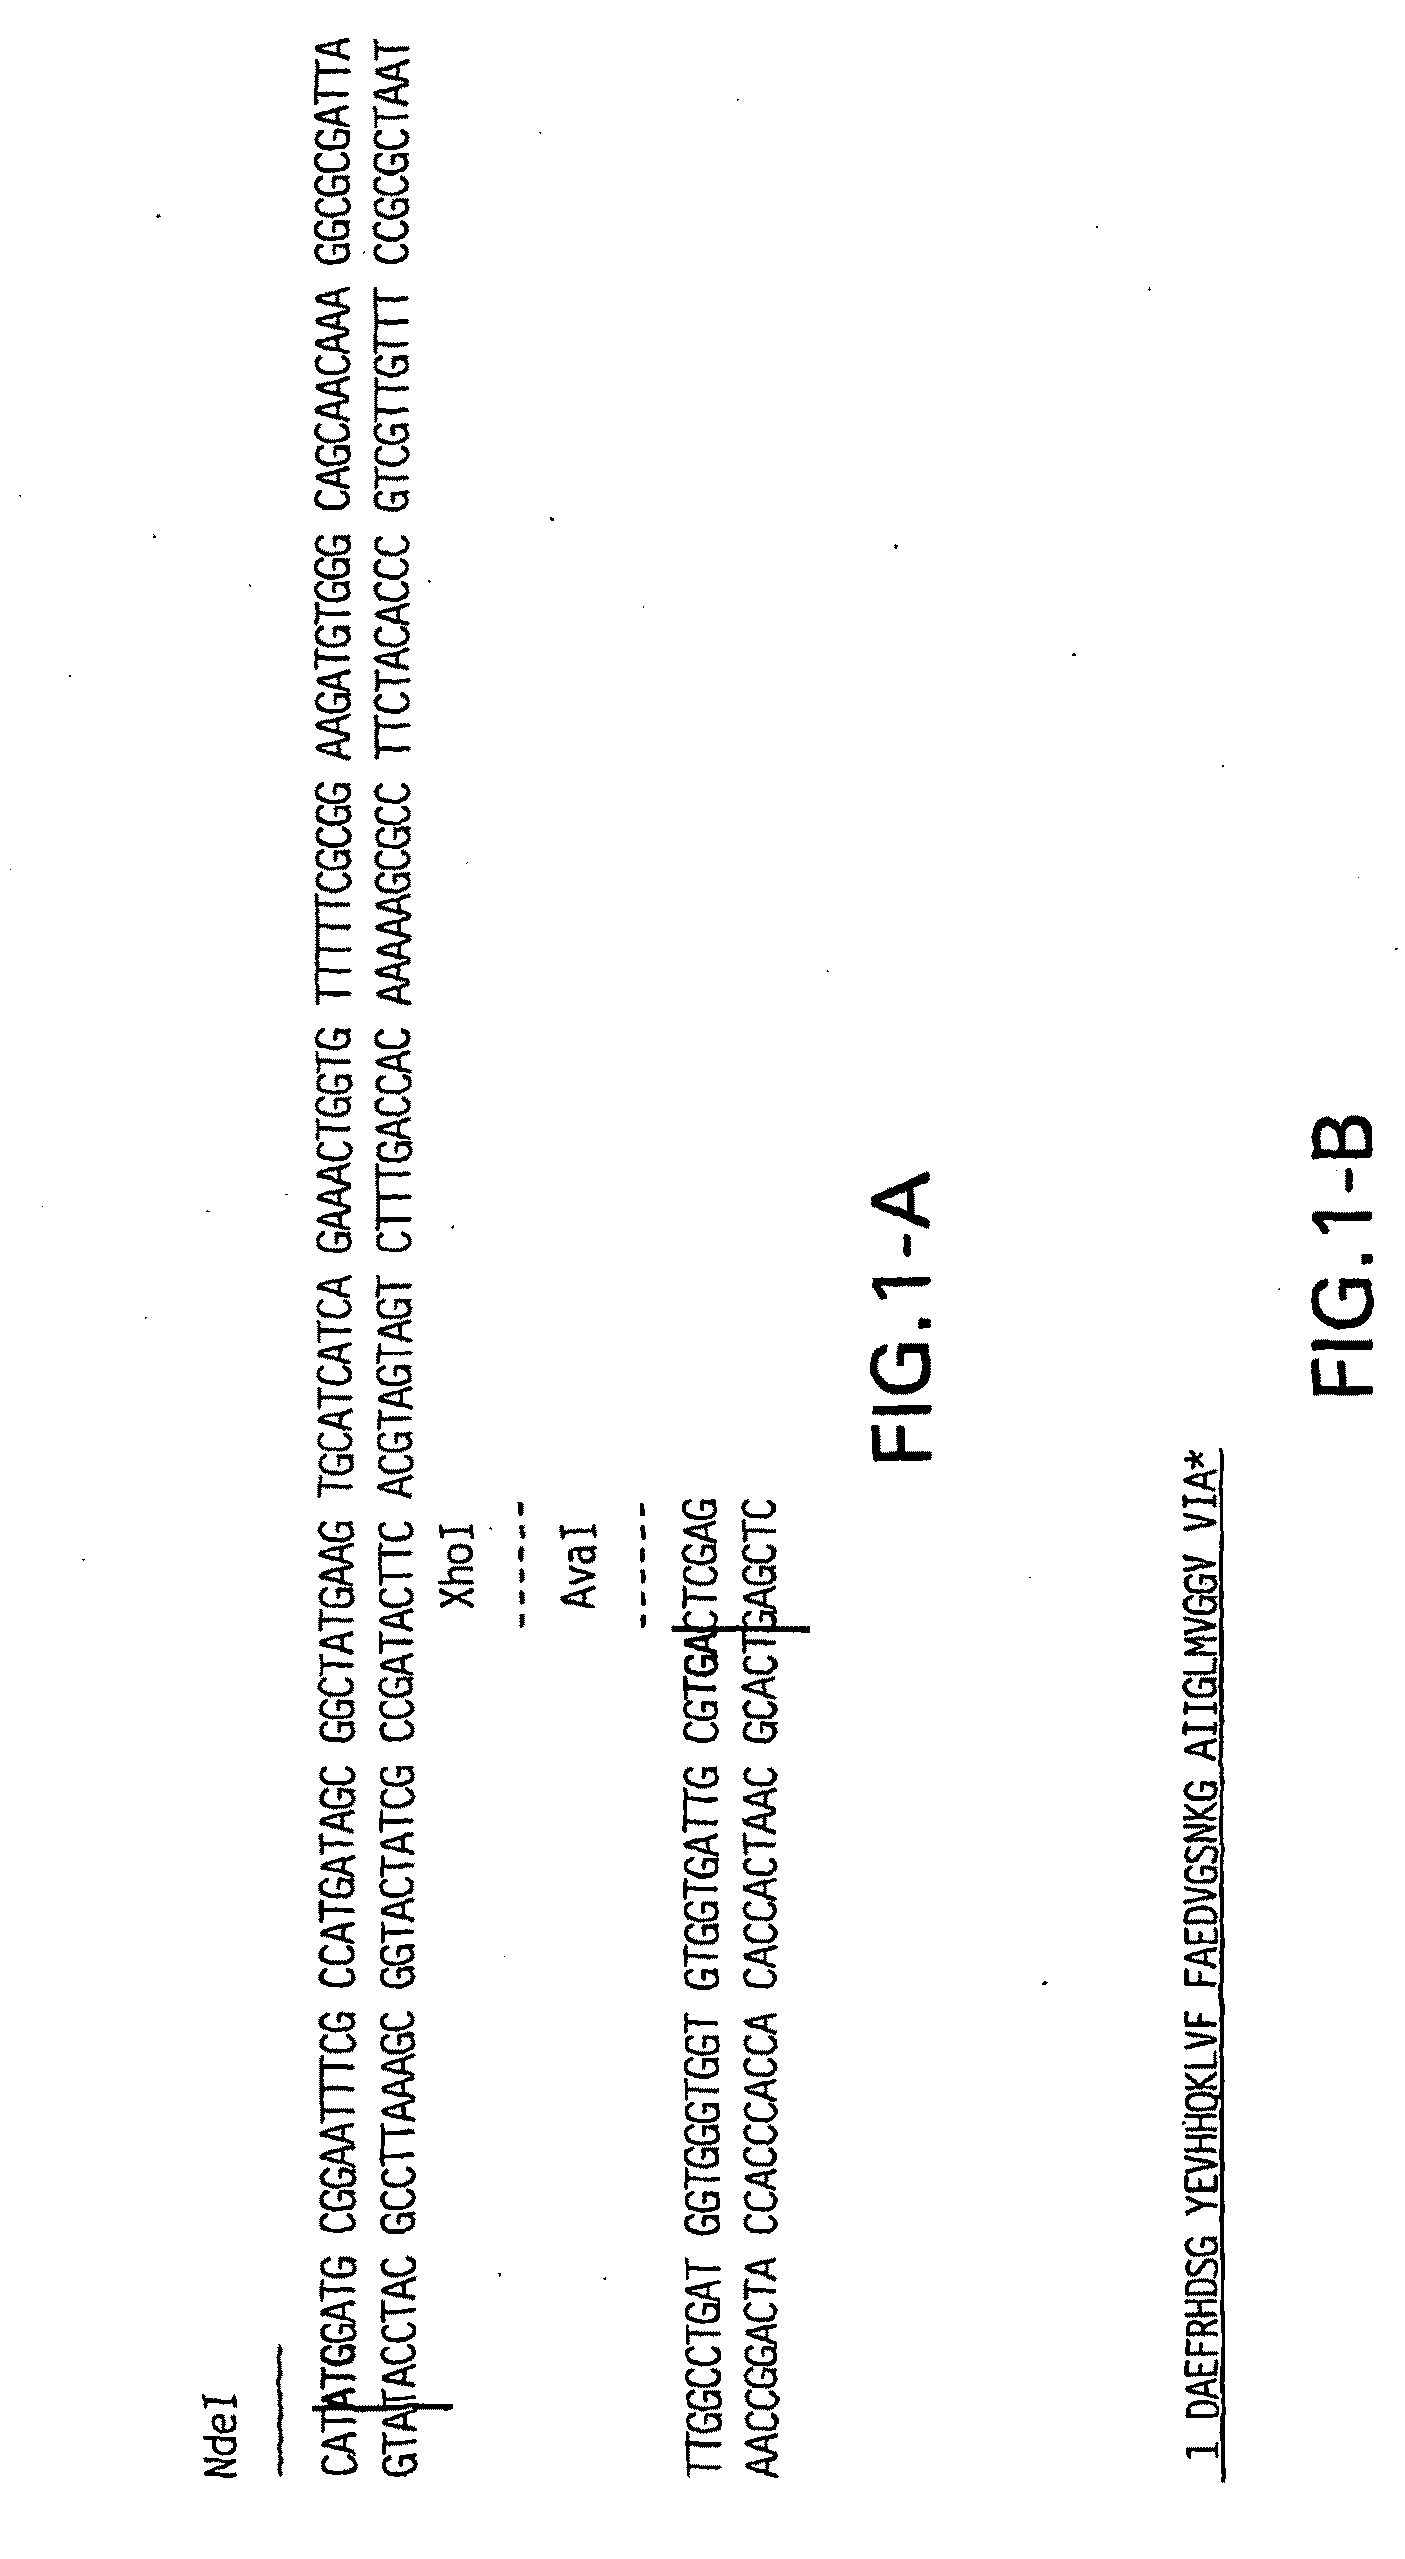 Methods of preparation of recombinant forms of human beta-amyloid protein and uses of these proteins